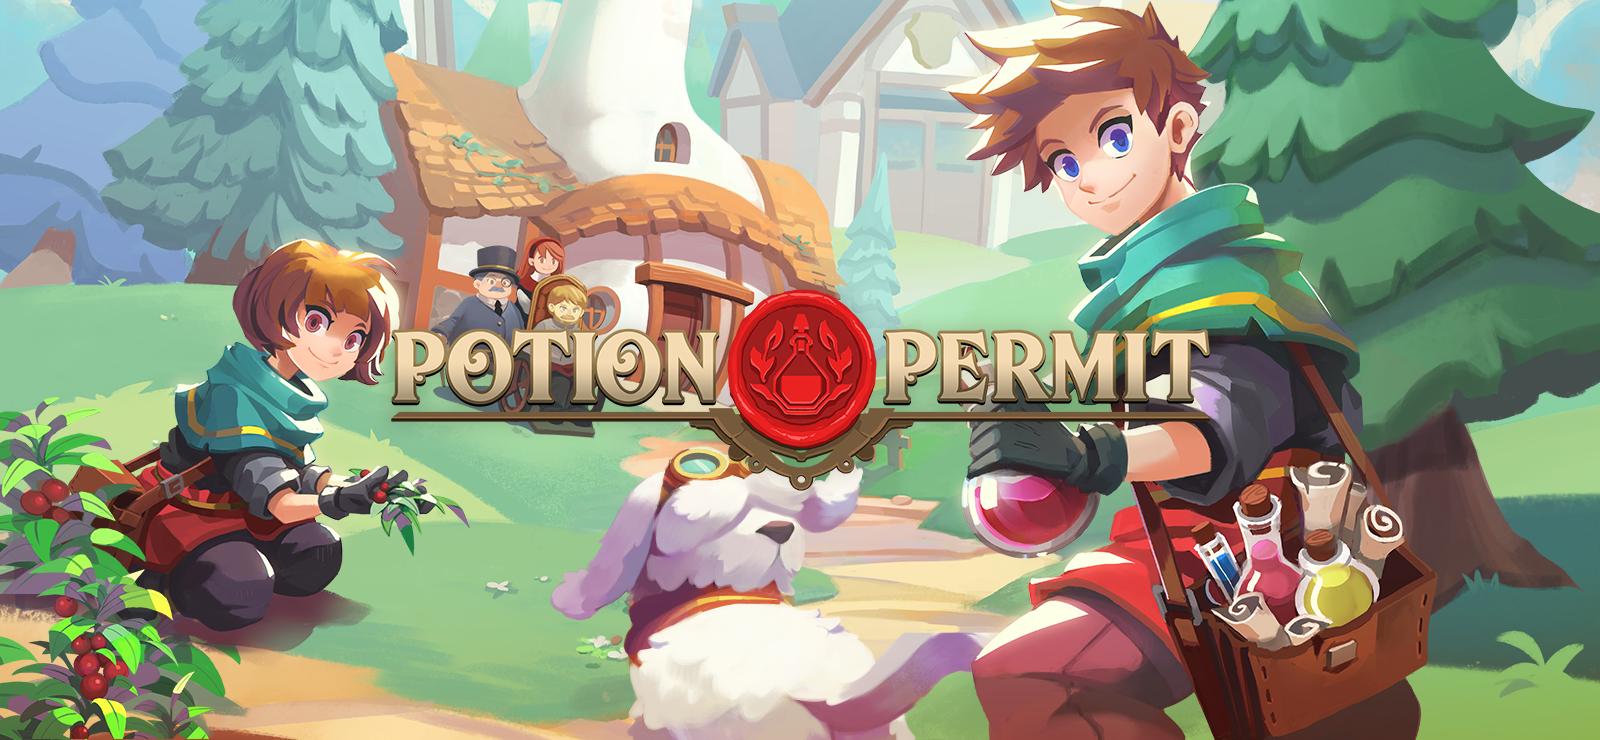 Potion Permit - Deluxe Edition